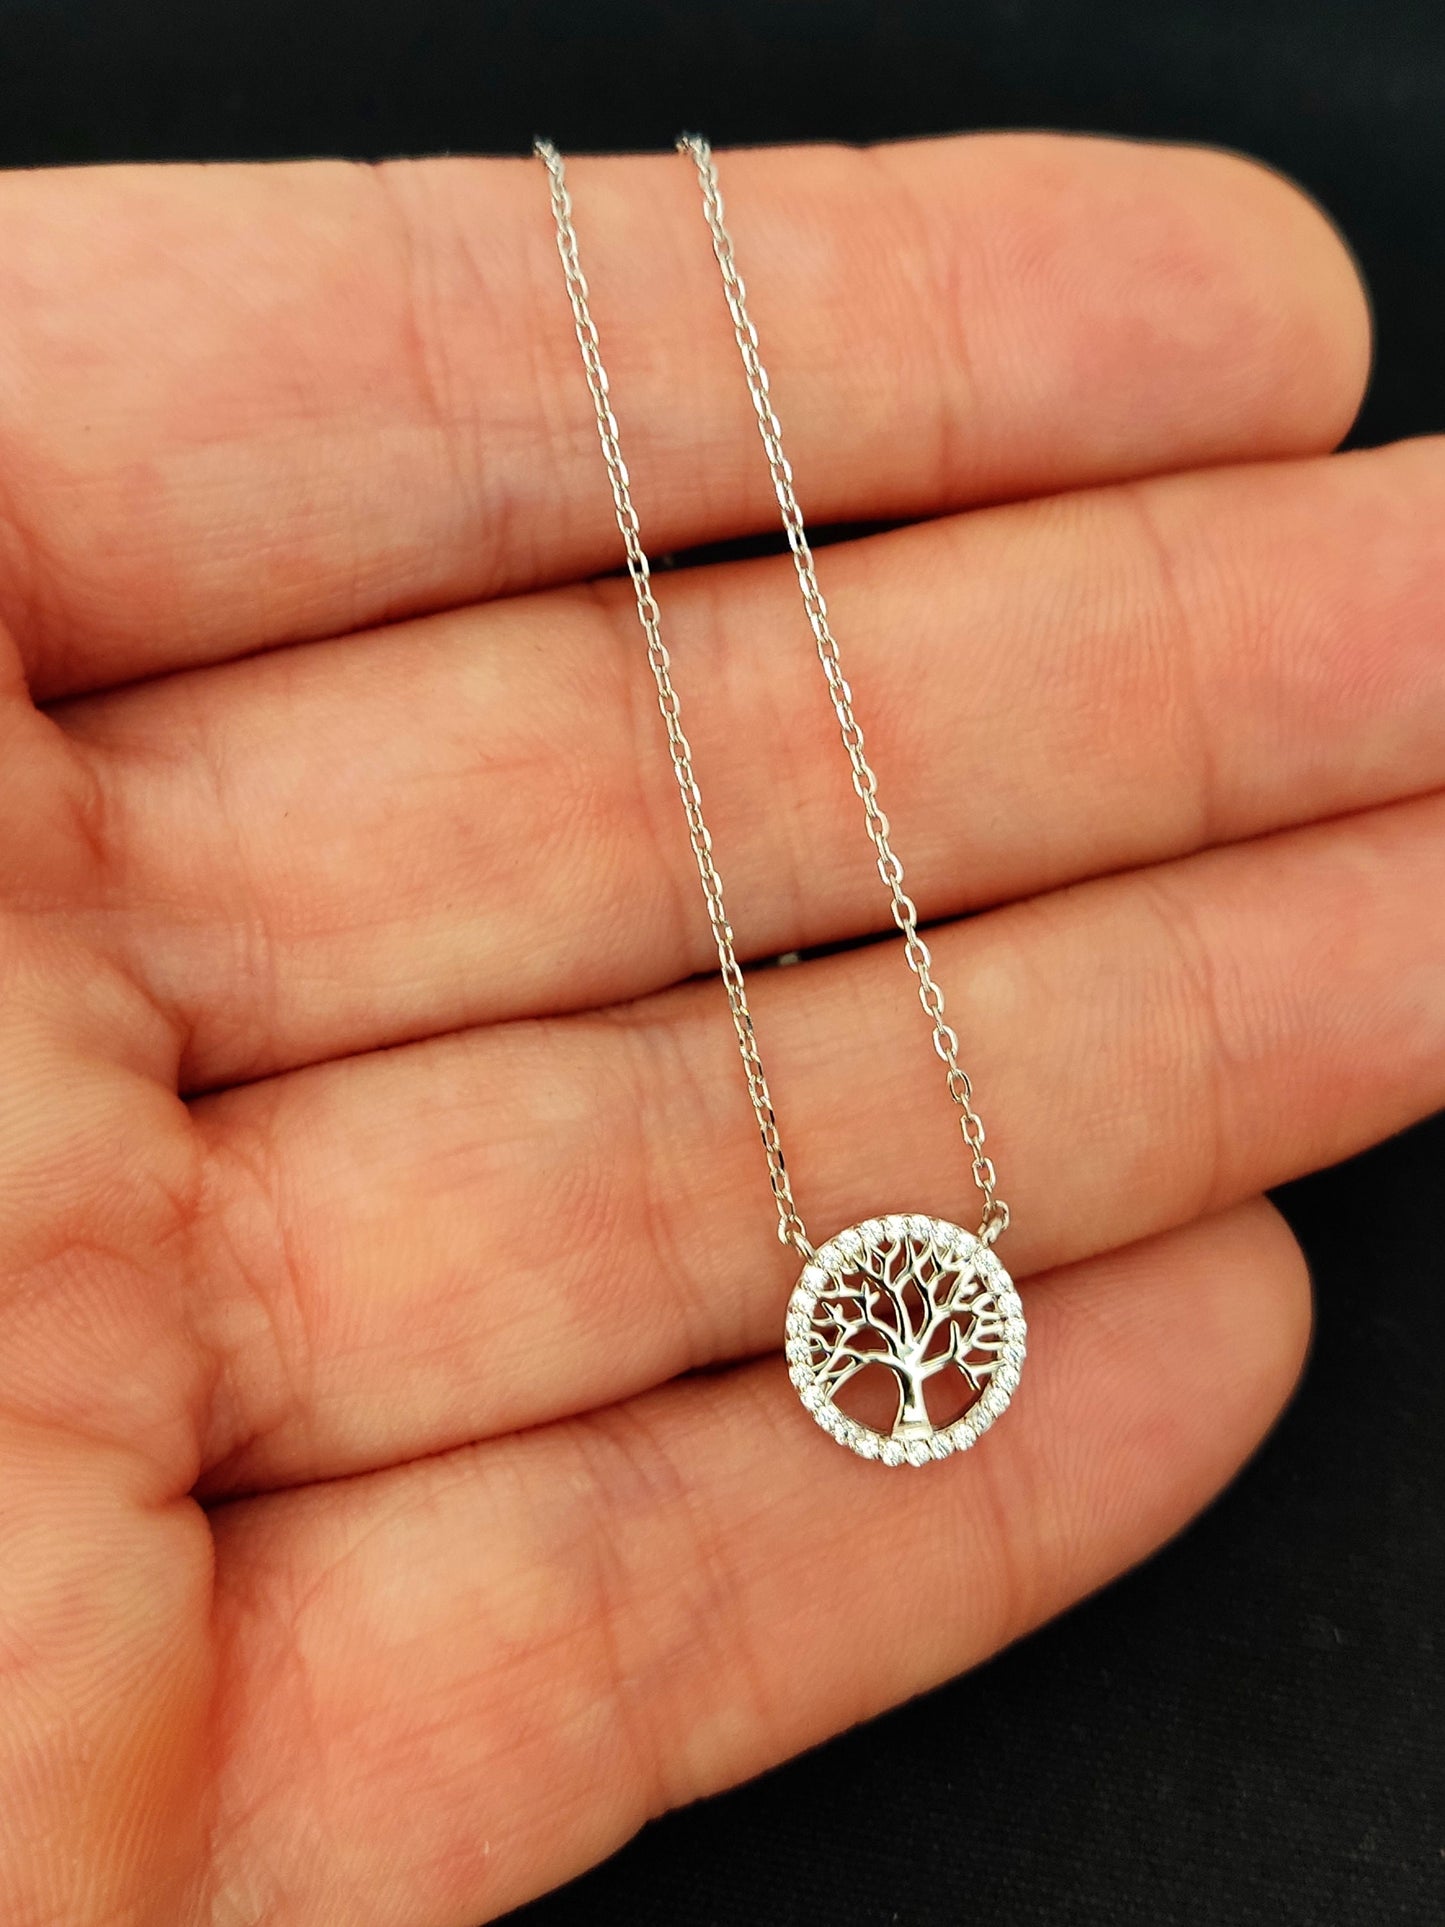 Sterling Silver 925 Silver-Gold-Rose Gold Small Tree Of Life Tiny Pendant Necklace, Tree Of Life Pendant 12mm, Minimalist Necklace Jewelry